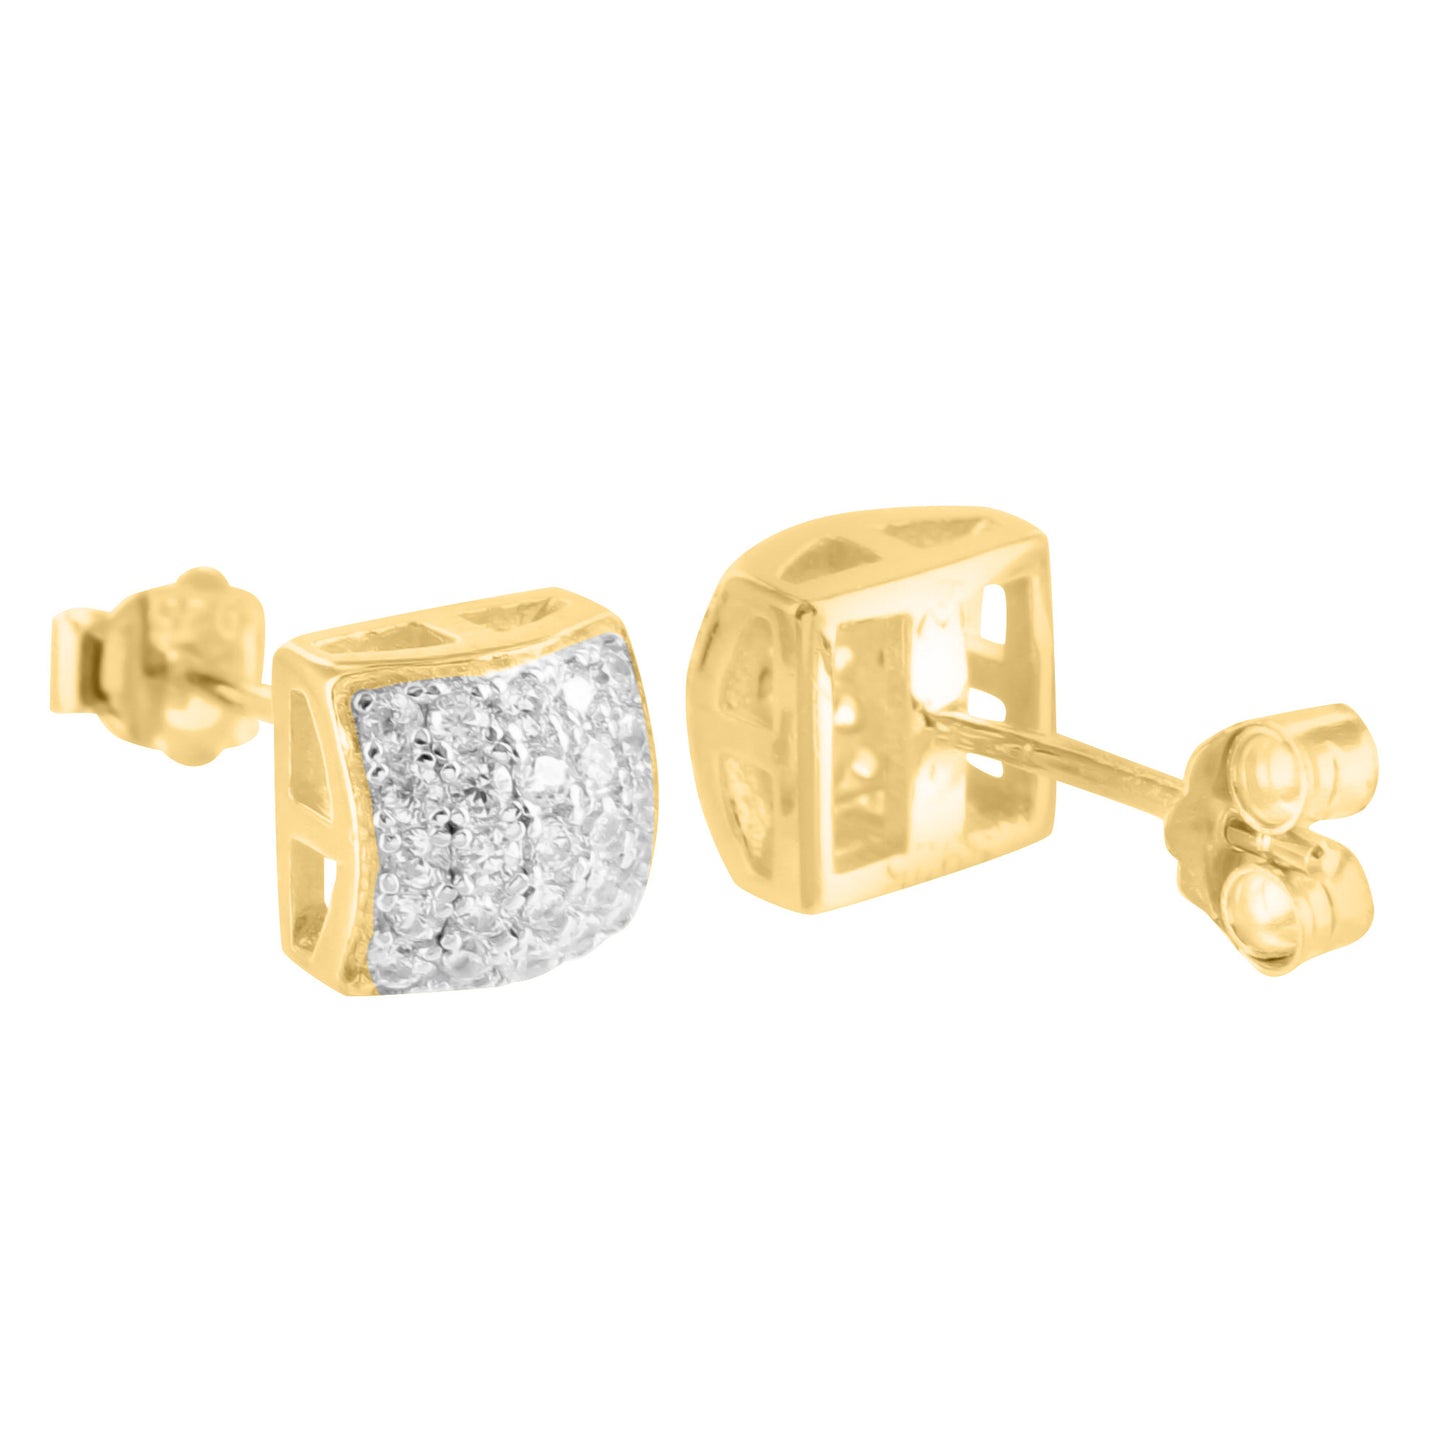 Yellow Gold Finish Dome Style Cubic Zircon 925 Silver Earrings